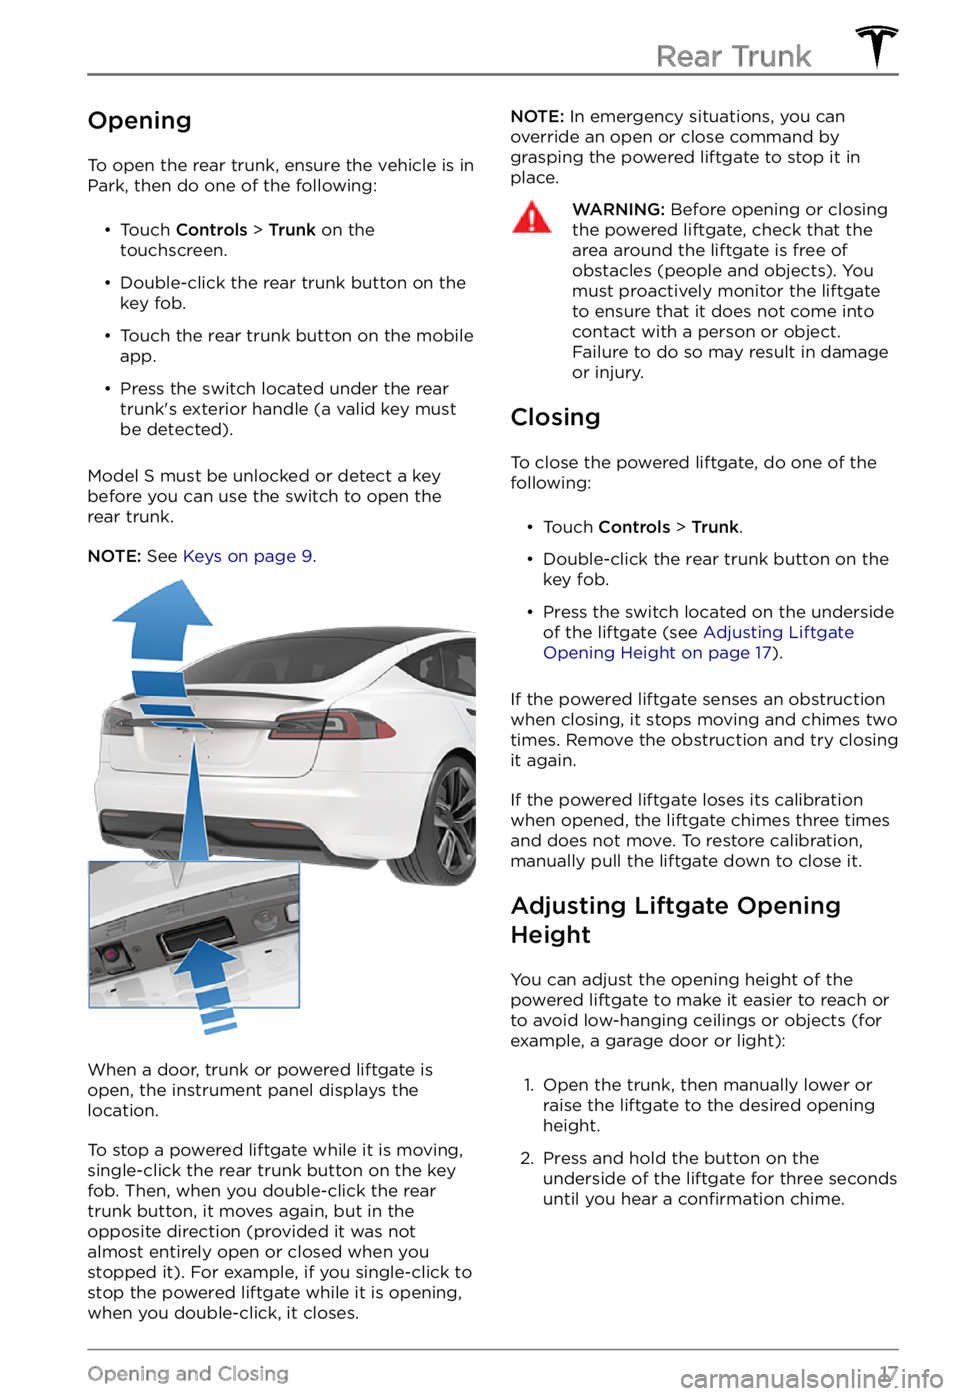 TESLA MODEL S 2021  Owner´s Manual Opening
To open the rear trunk, ensure the vehicle is in 
Park, then do one of the following:
